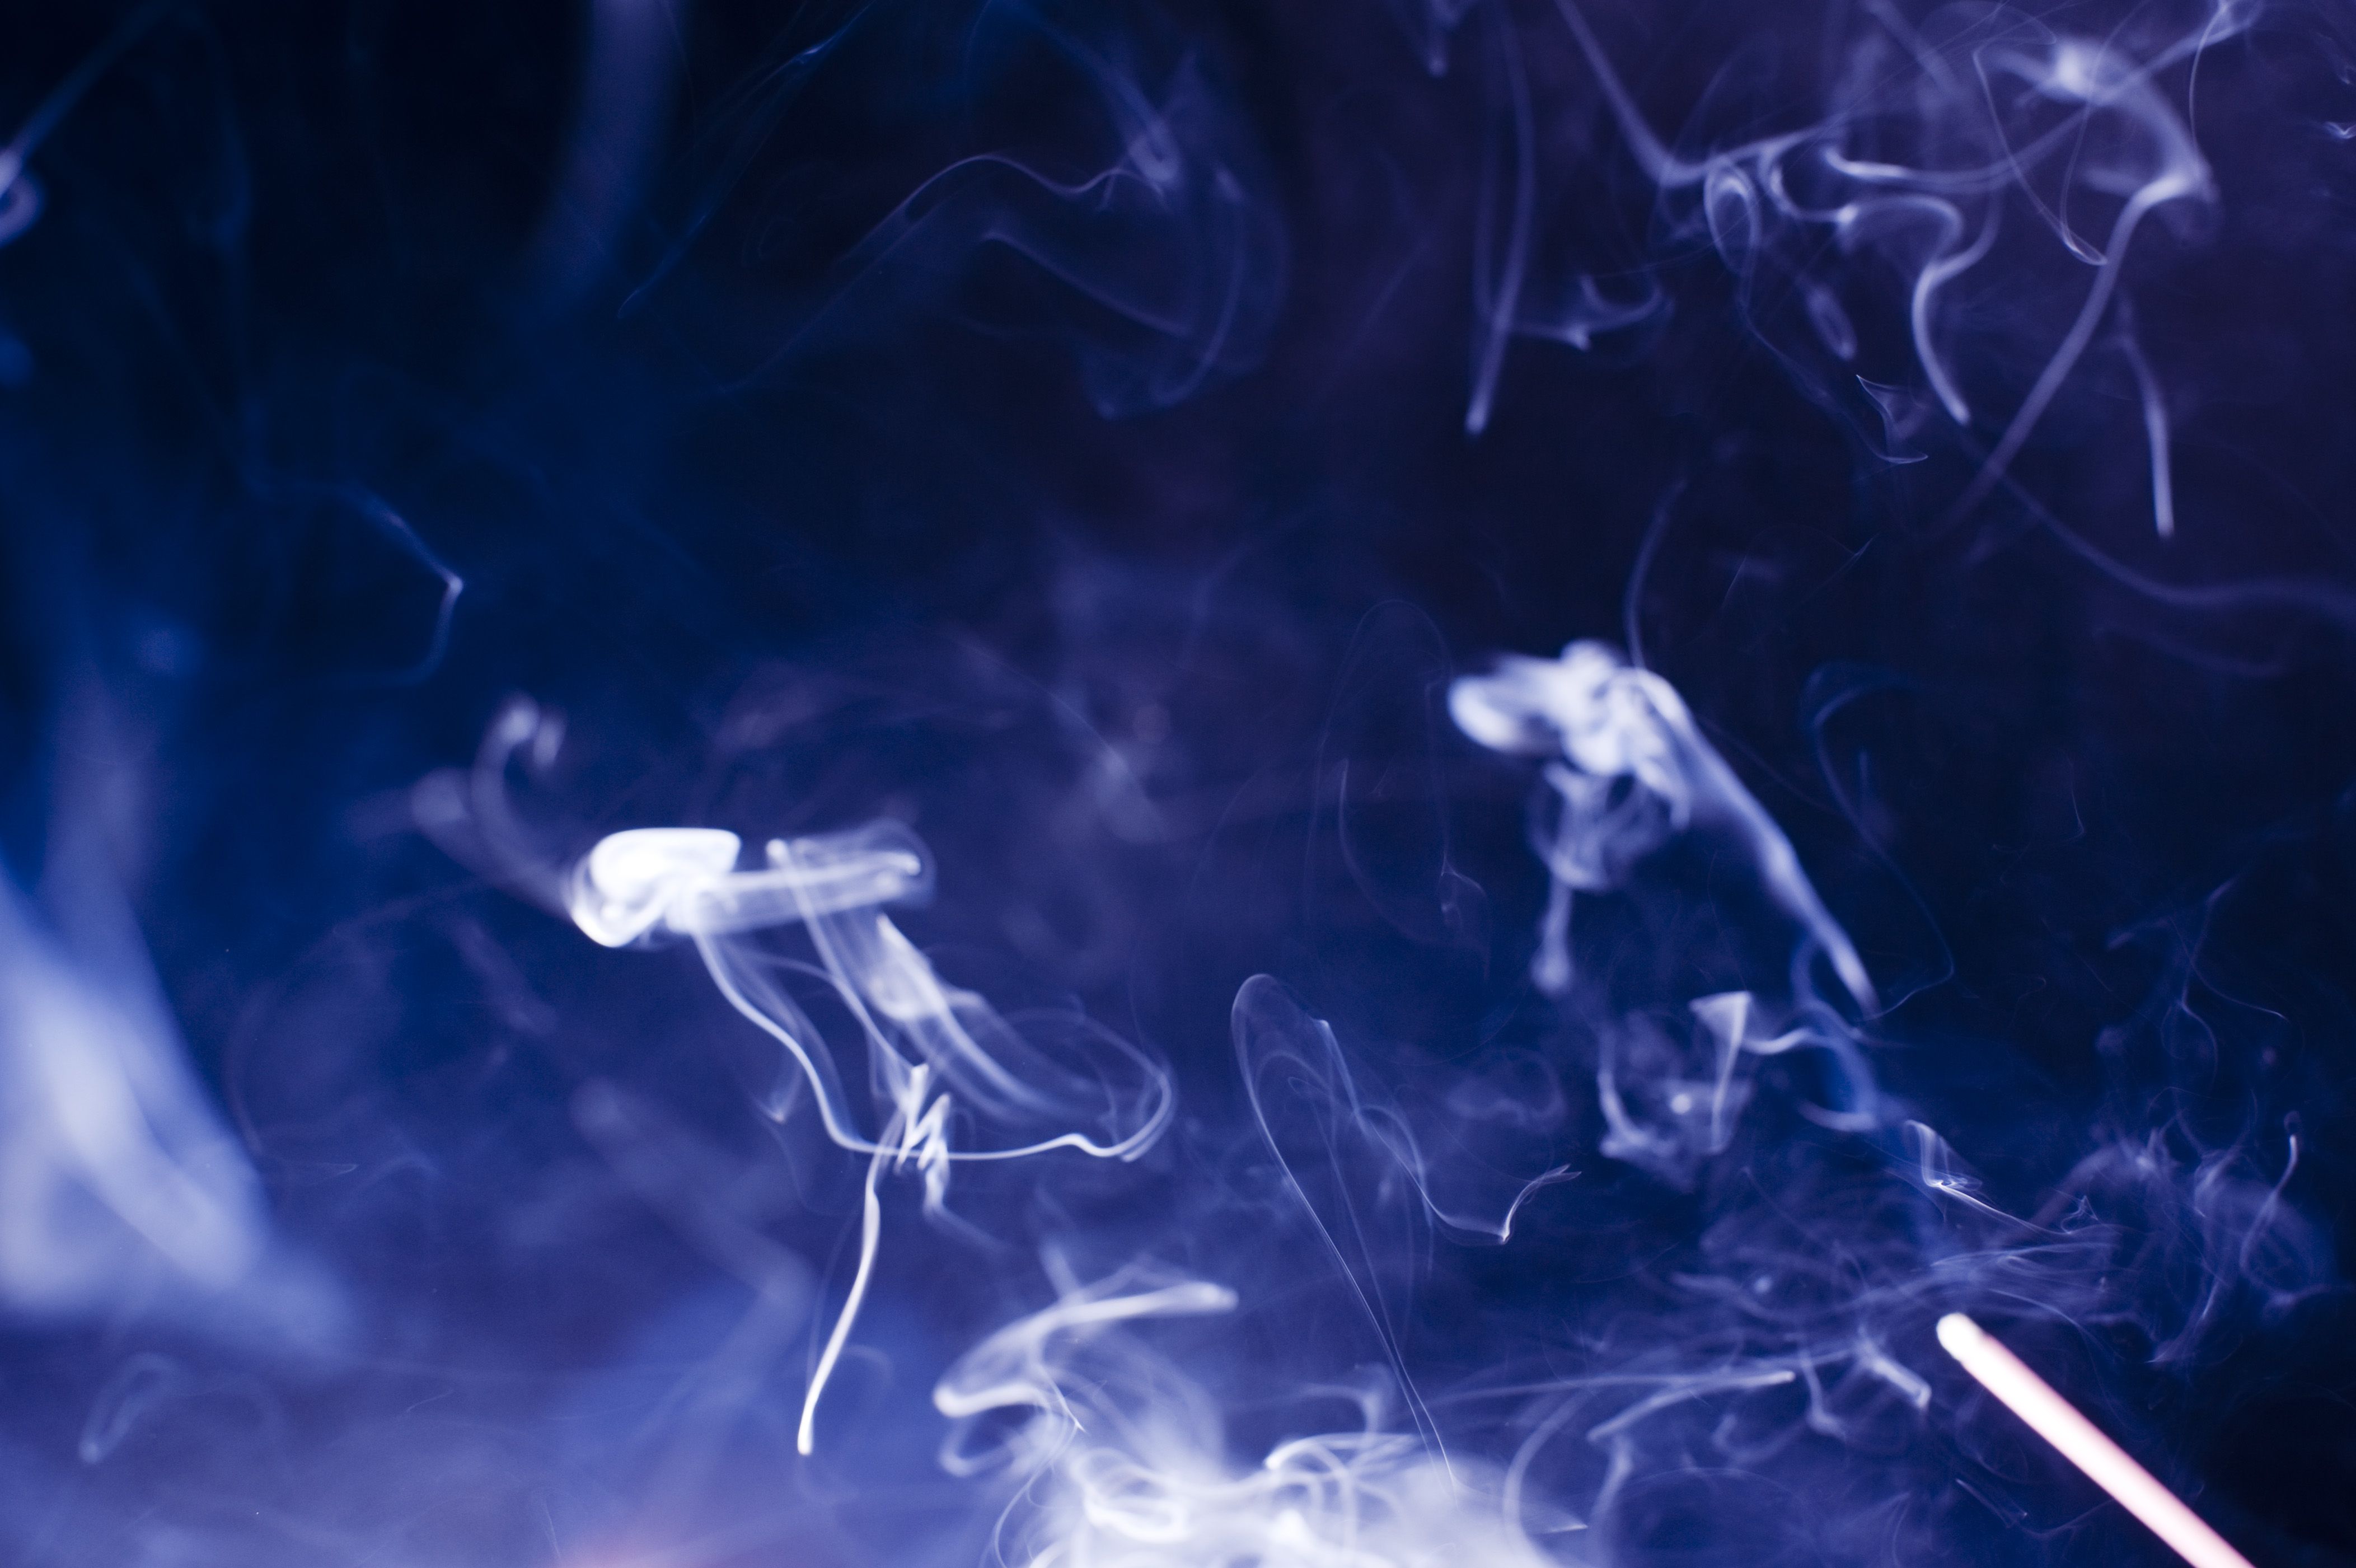 smoke shapes. Free background and textures